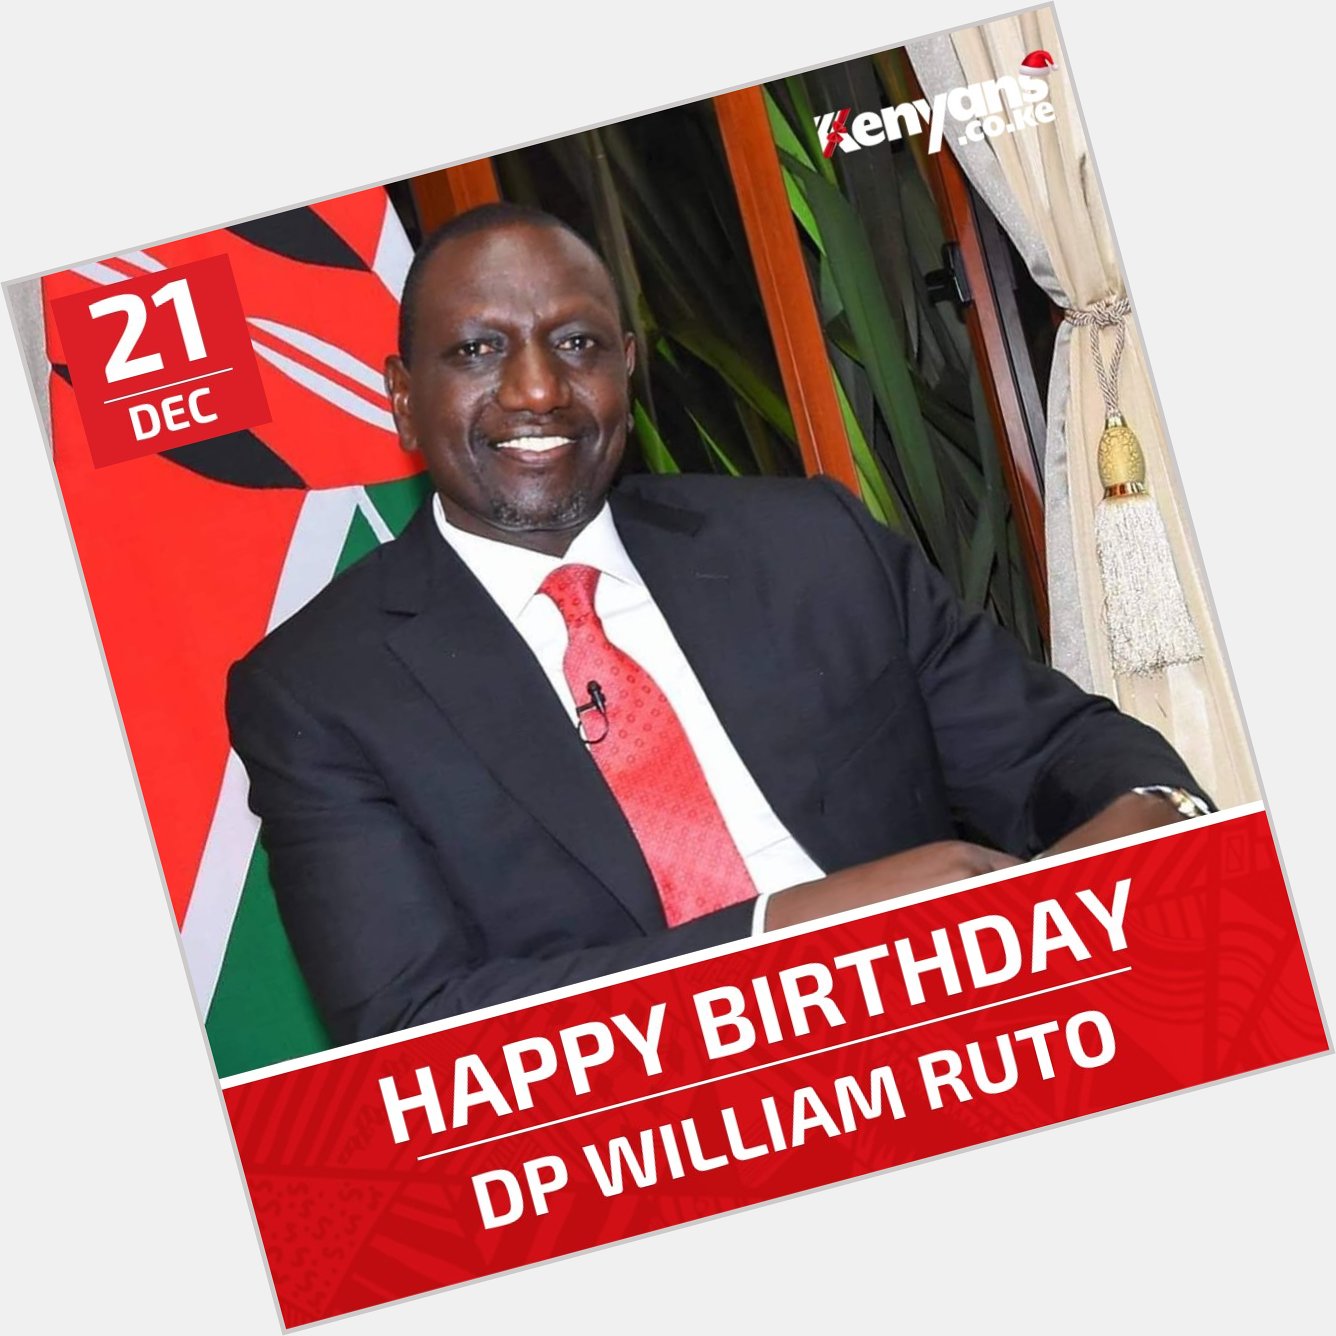 Happy Birthday your excellency Dr. William Ruto. 